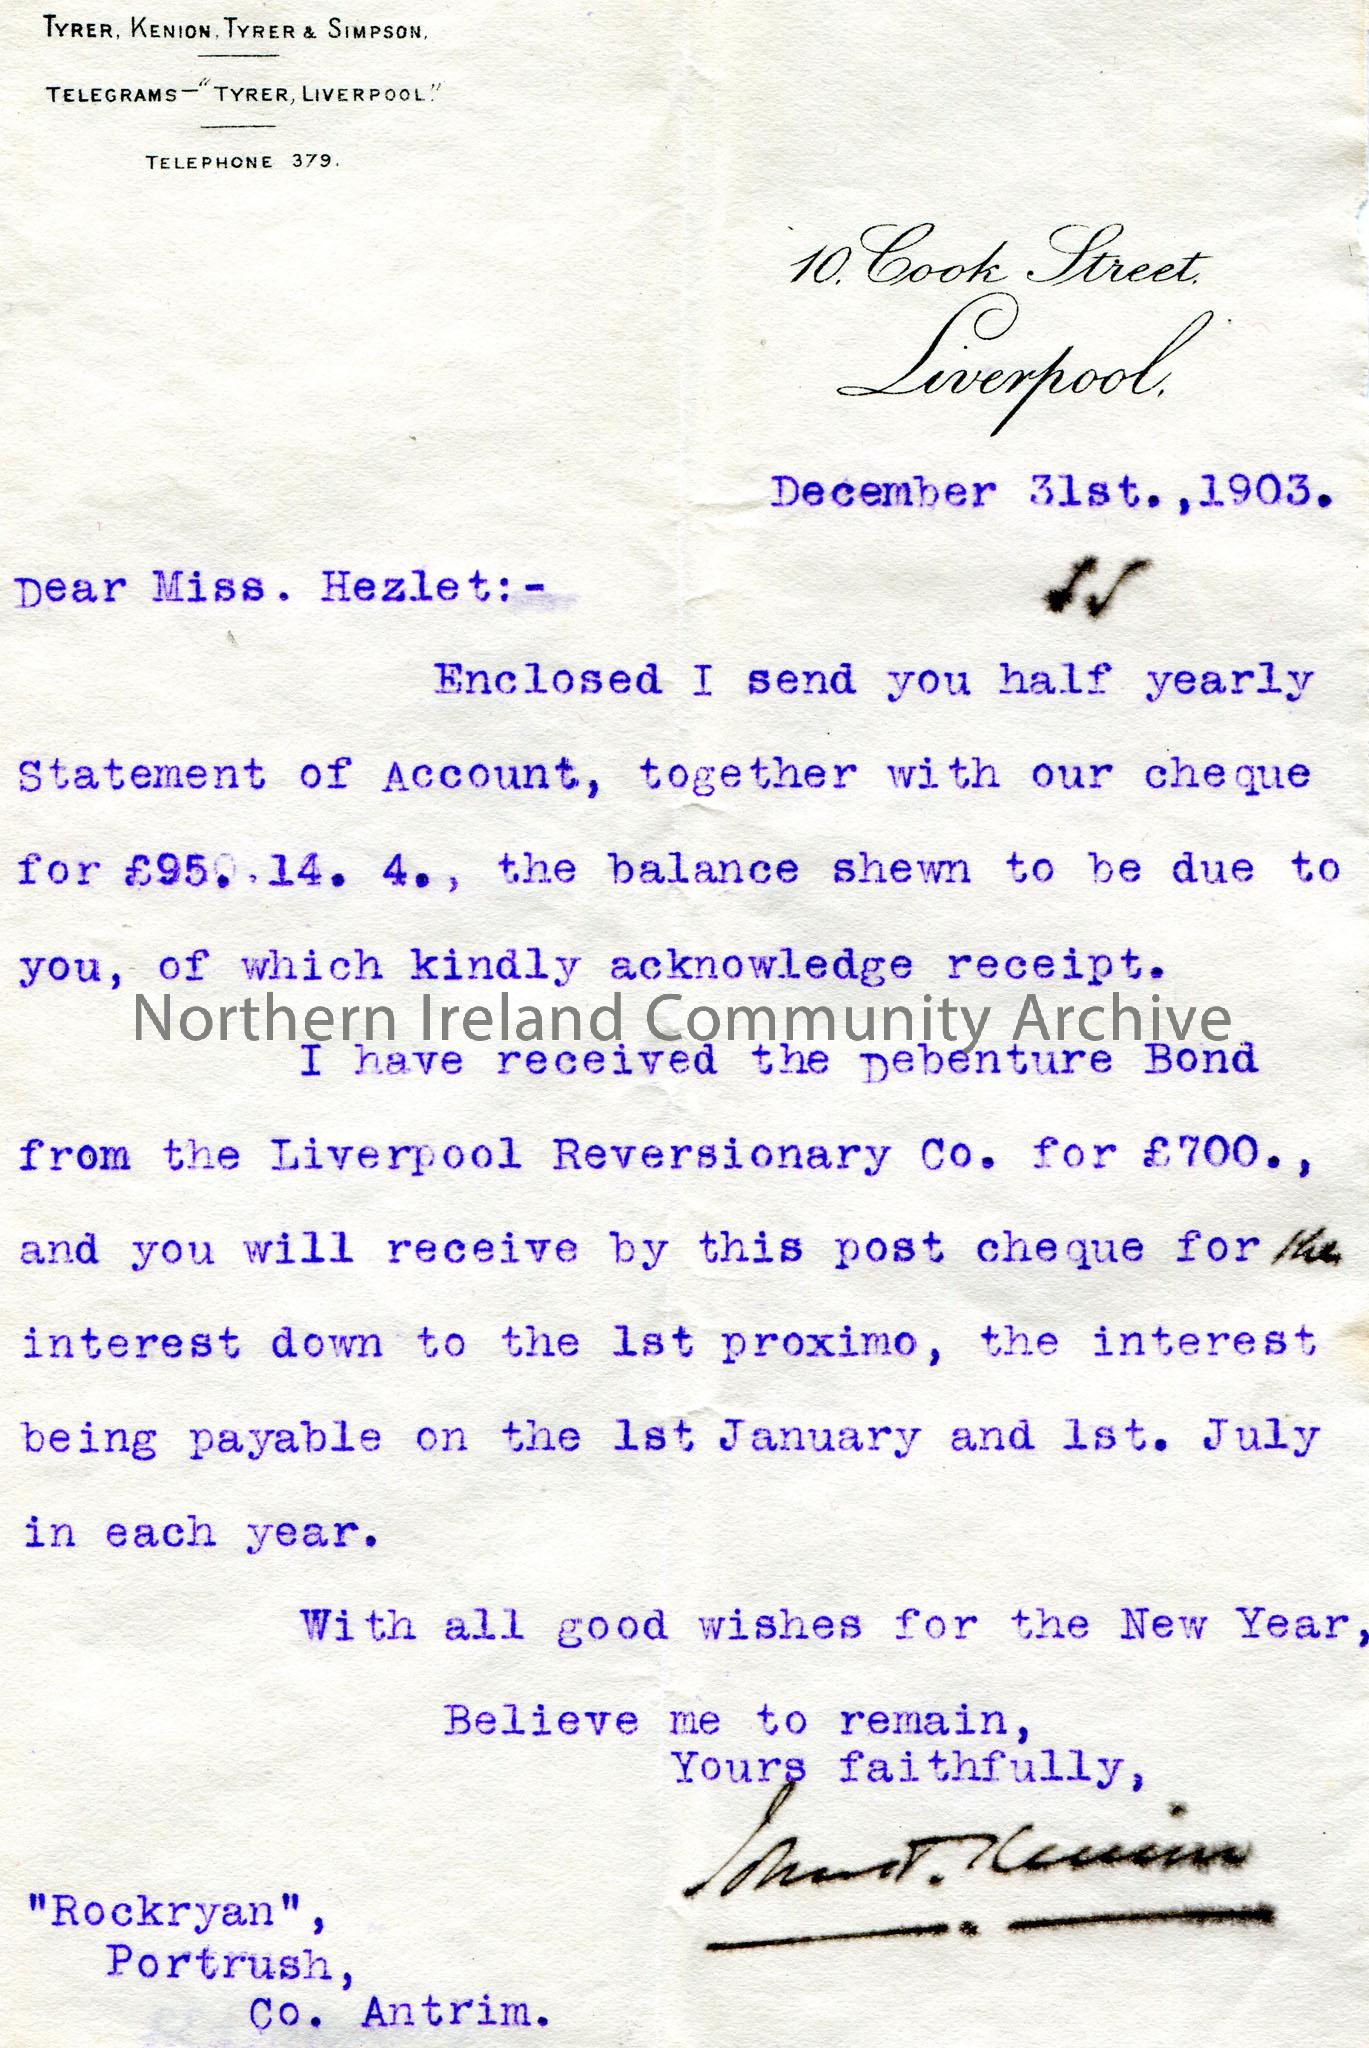 Typed letter to Miss Hezlet at Rockryan, Portrush, Co.Antrim. Enclosed a half yearly Statement of Account and a cheque for £95.14.4. He has recei…